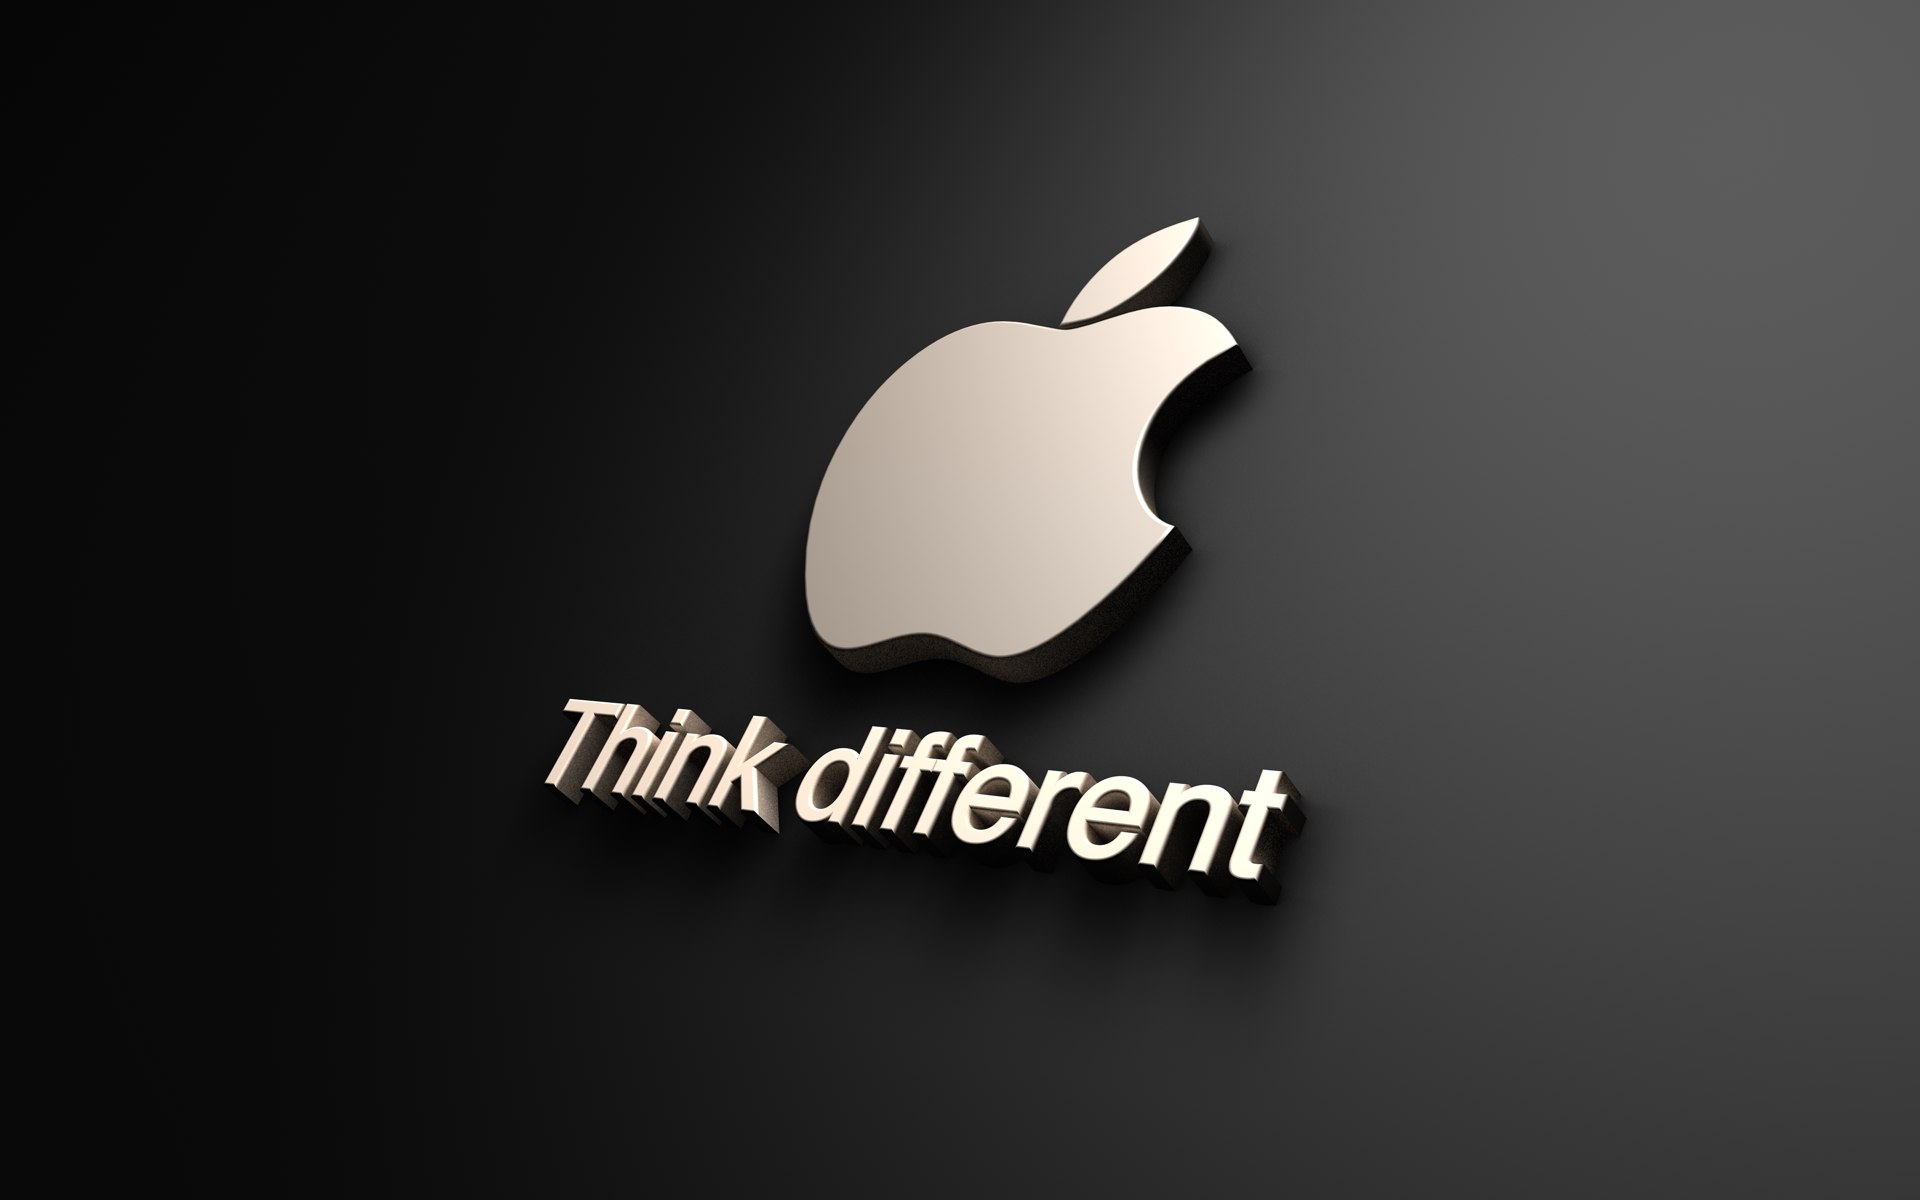 Apple Logo Wallpapers HD think different